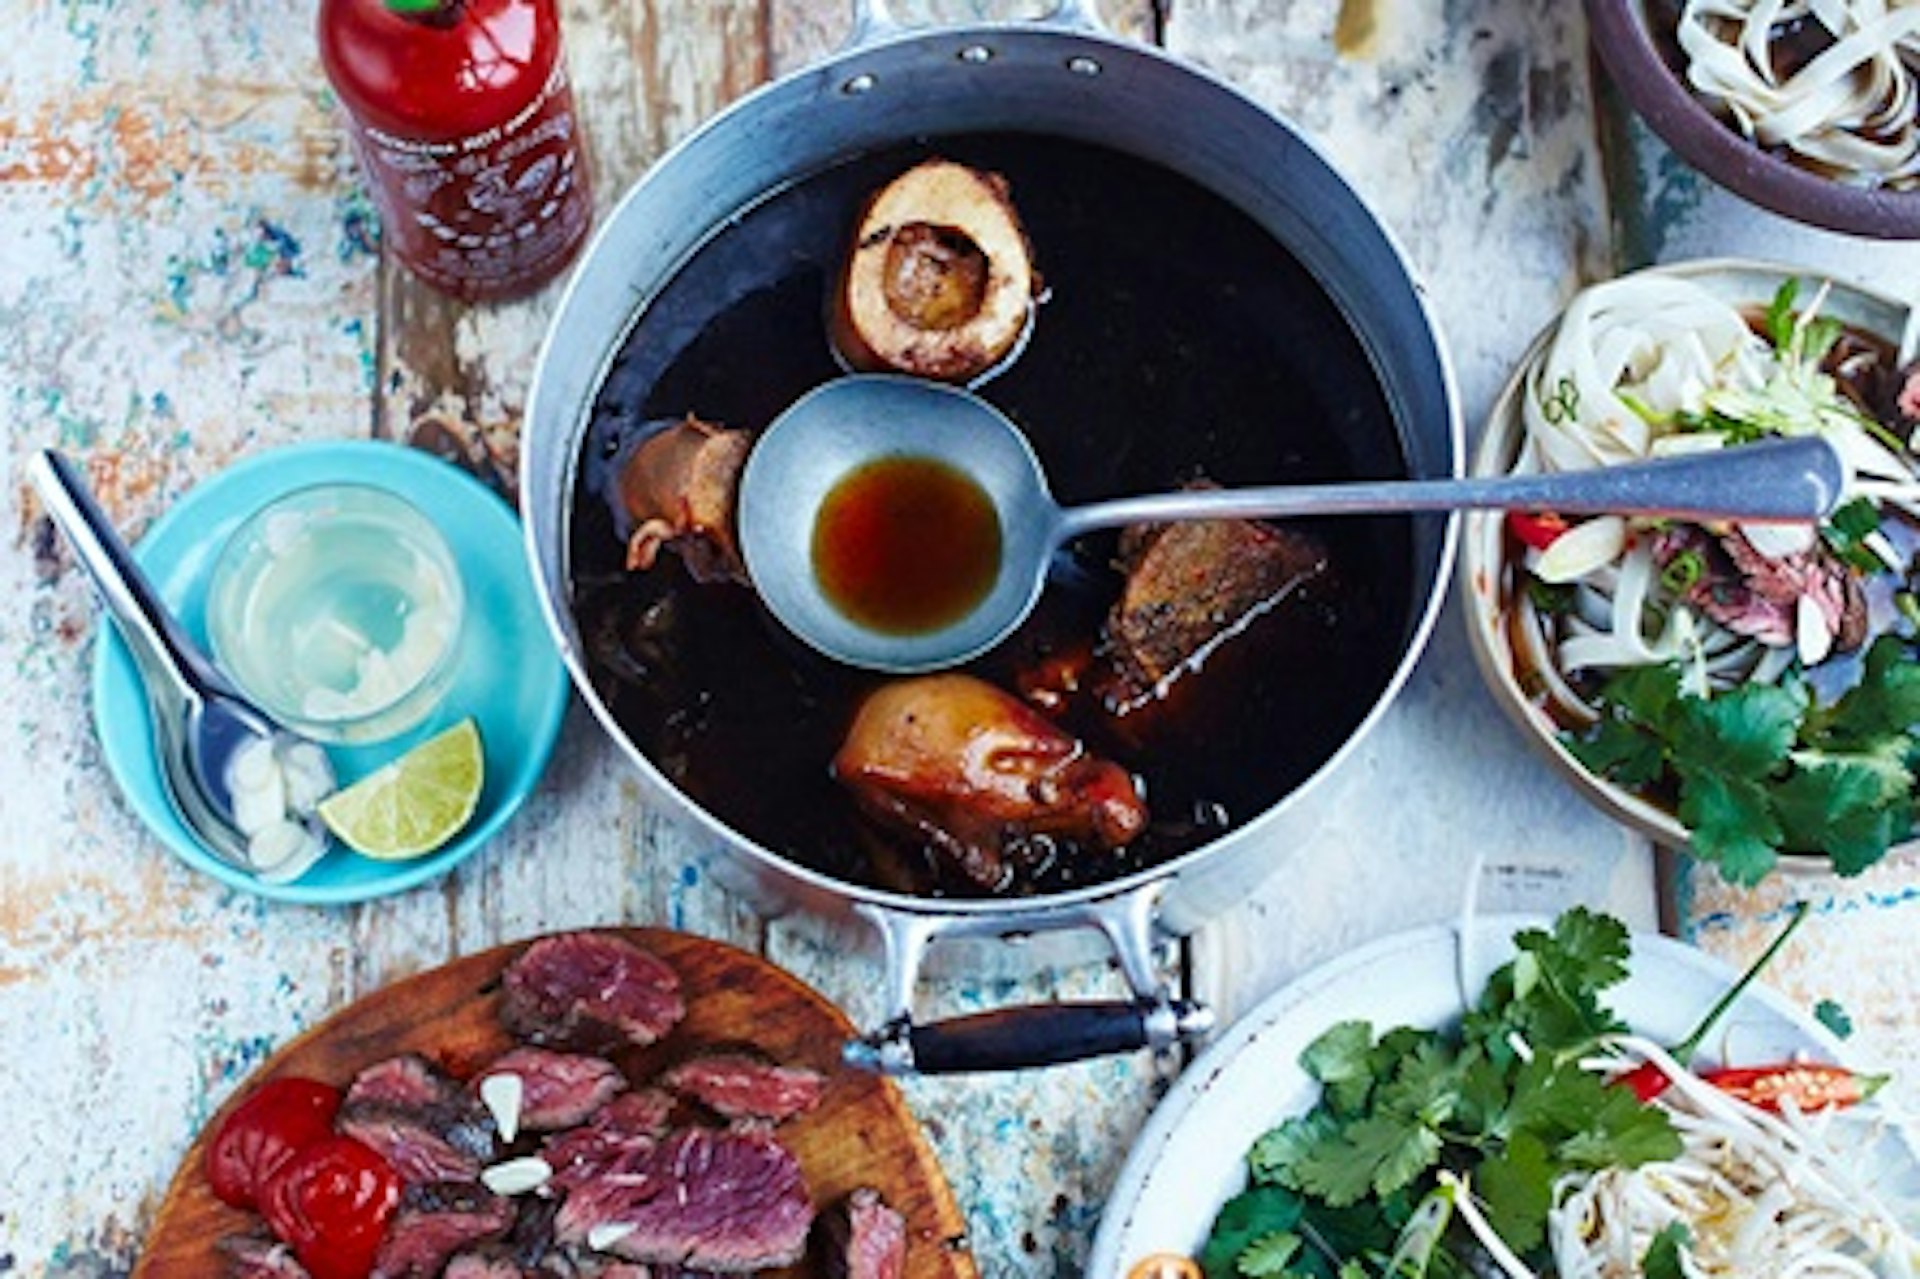 Vietnamese Street Food Class for Two at The Jamie Oliver Cookery School